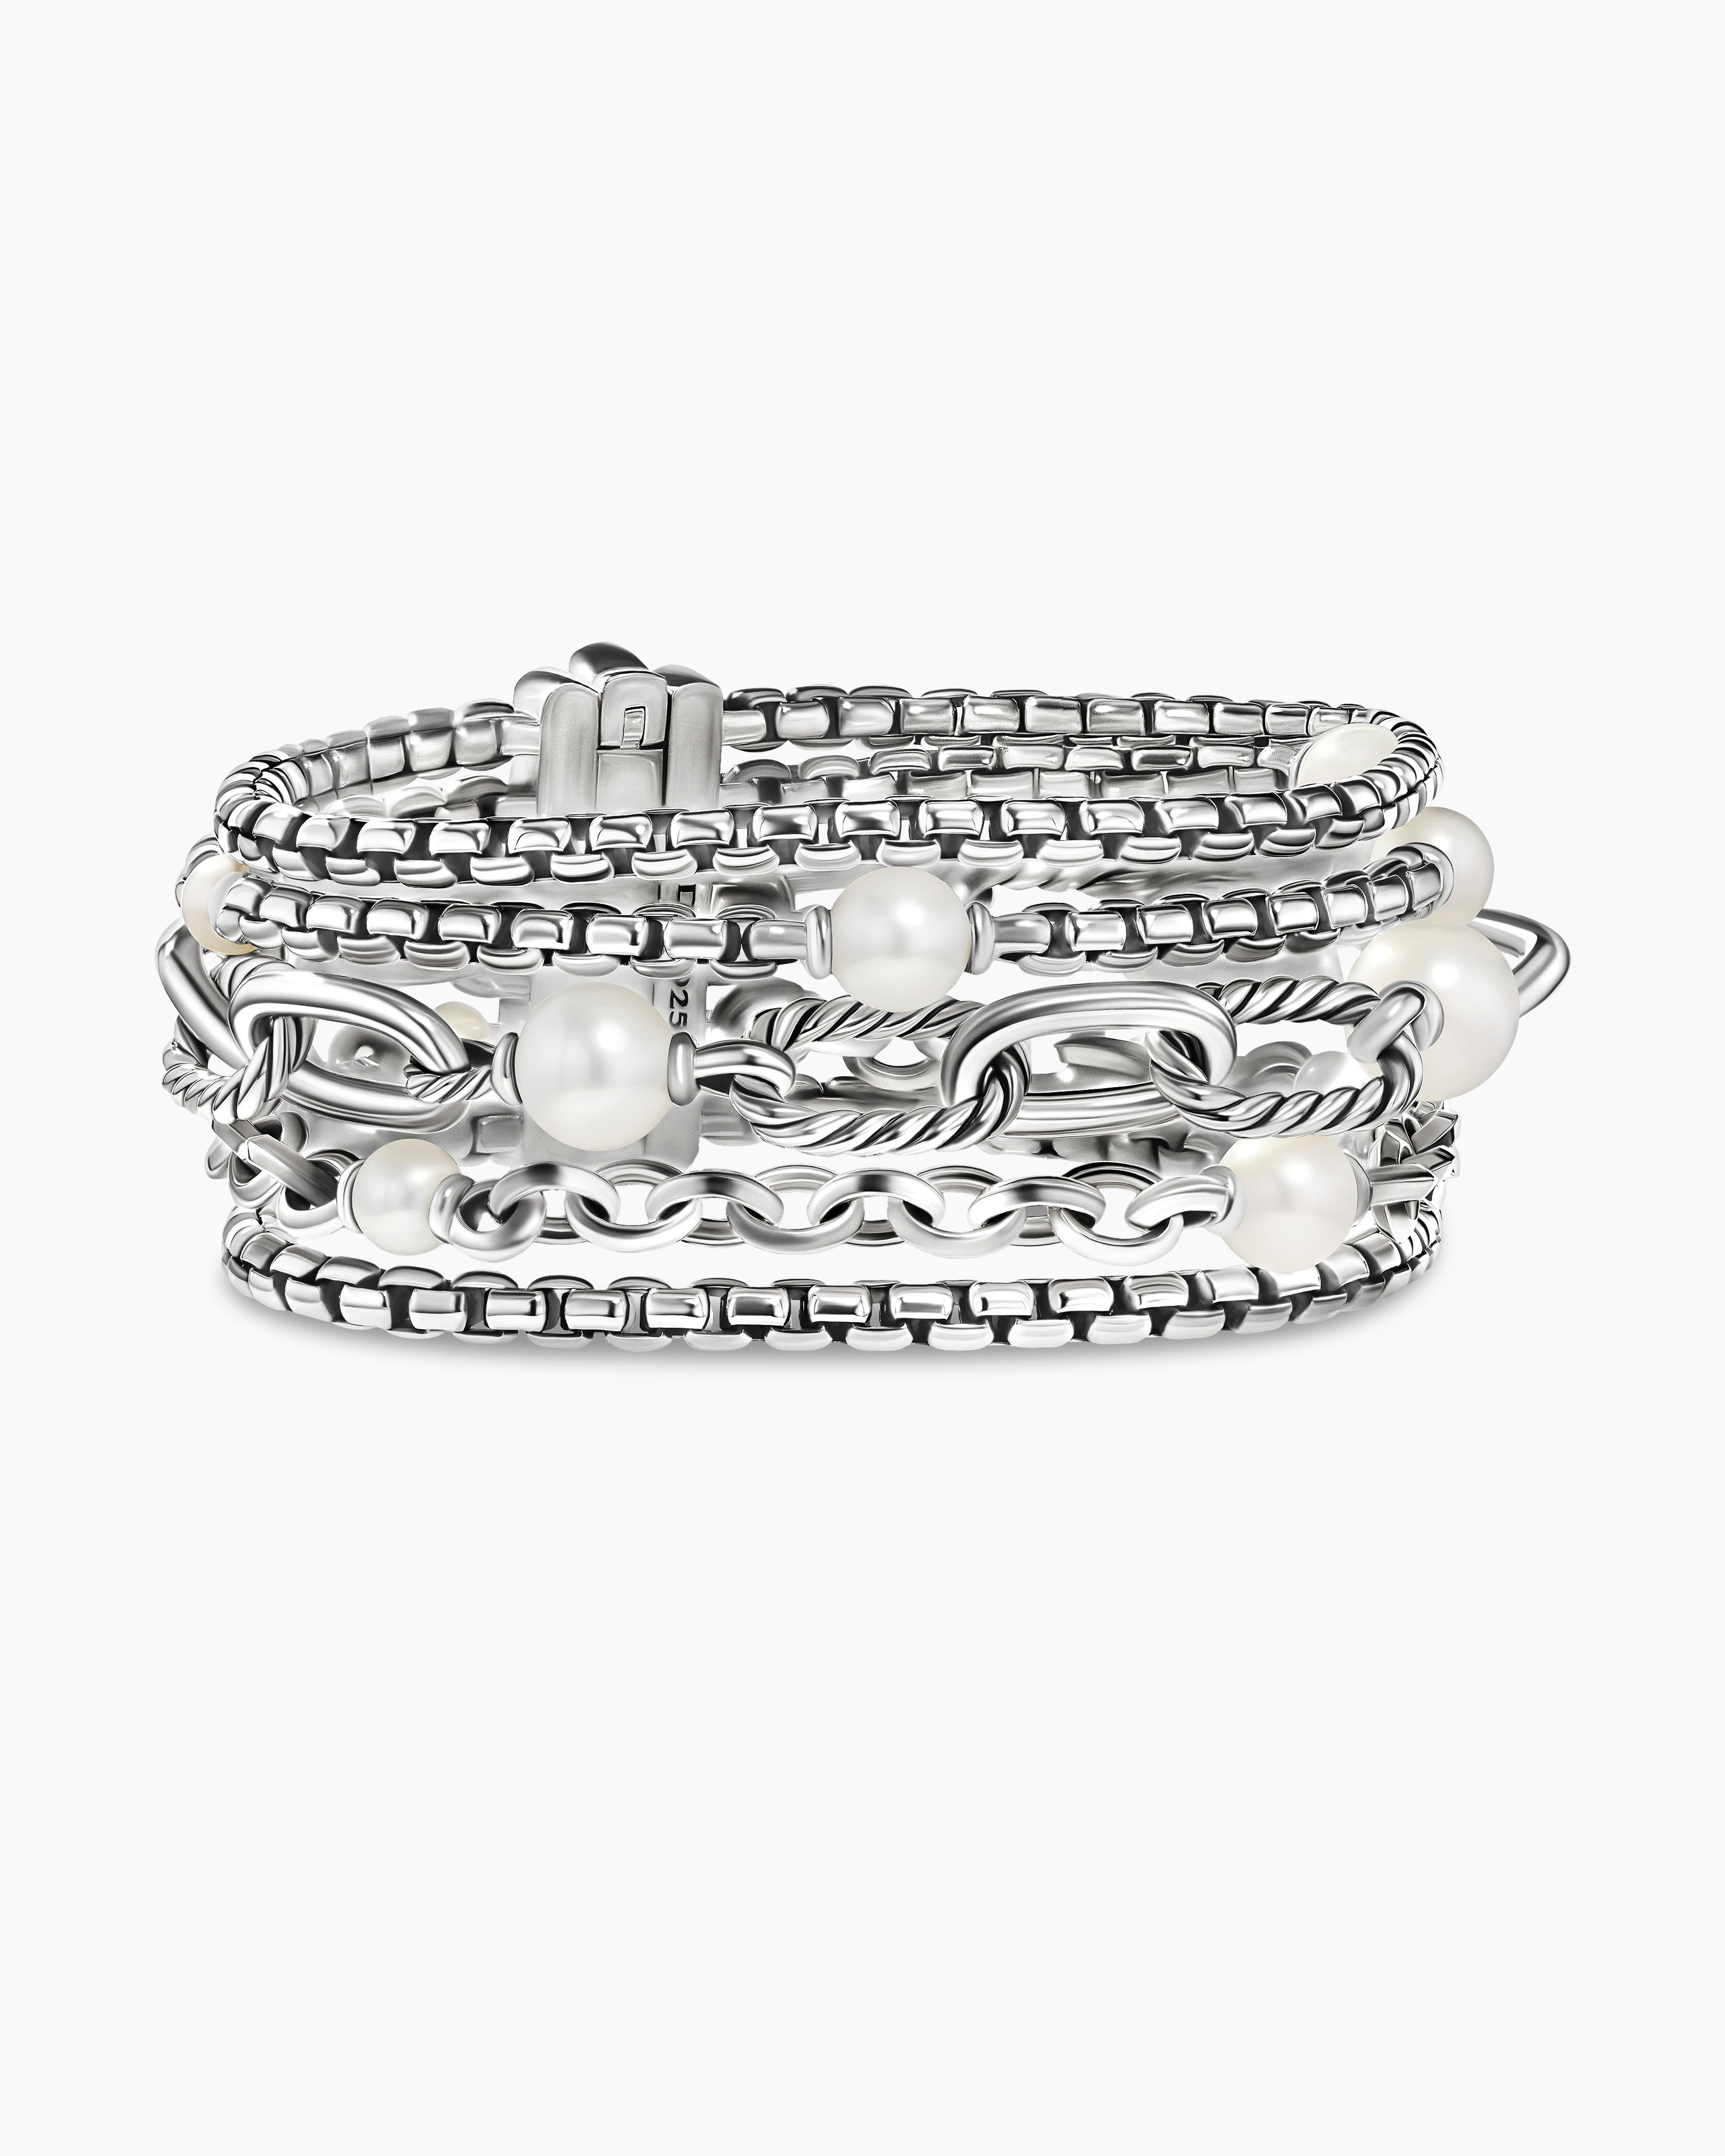 DY Madison® Pearl Multi Row Chain Bracelet in Sterling Silver with Pearls,  25.7mm